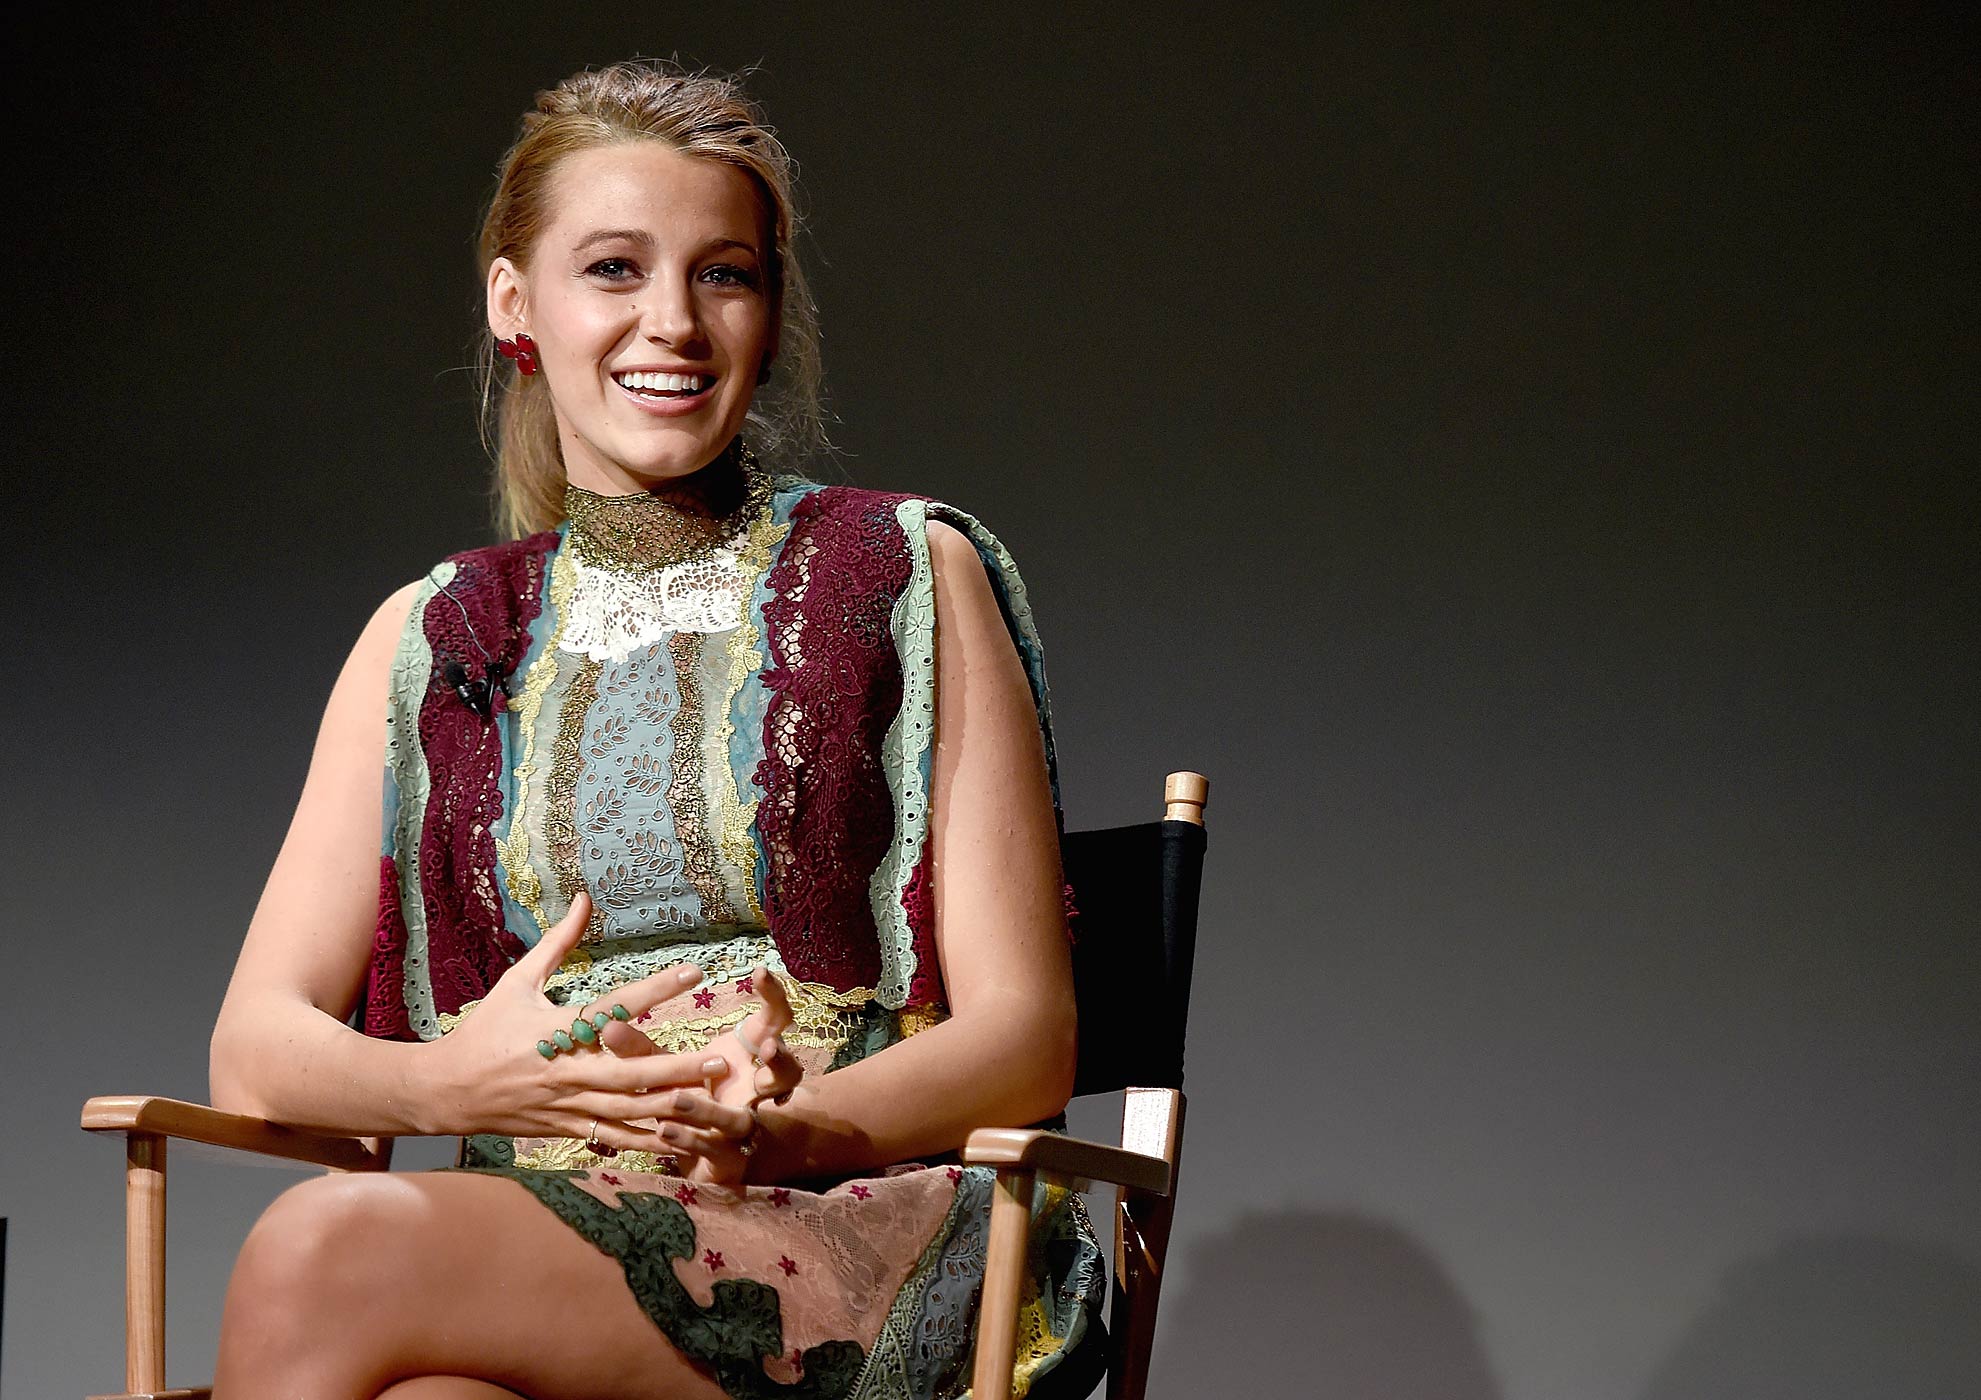 Blake Lively attends the Apple Store Soho Presents Meet The Filmmaker: Blake Lively, <i>Age of Adaline</i> on April 22, 2015 in New York City. (Jamie McCarthy—Getty Images)